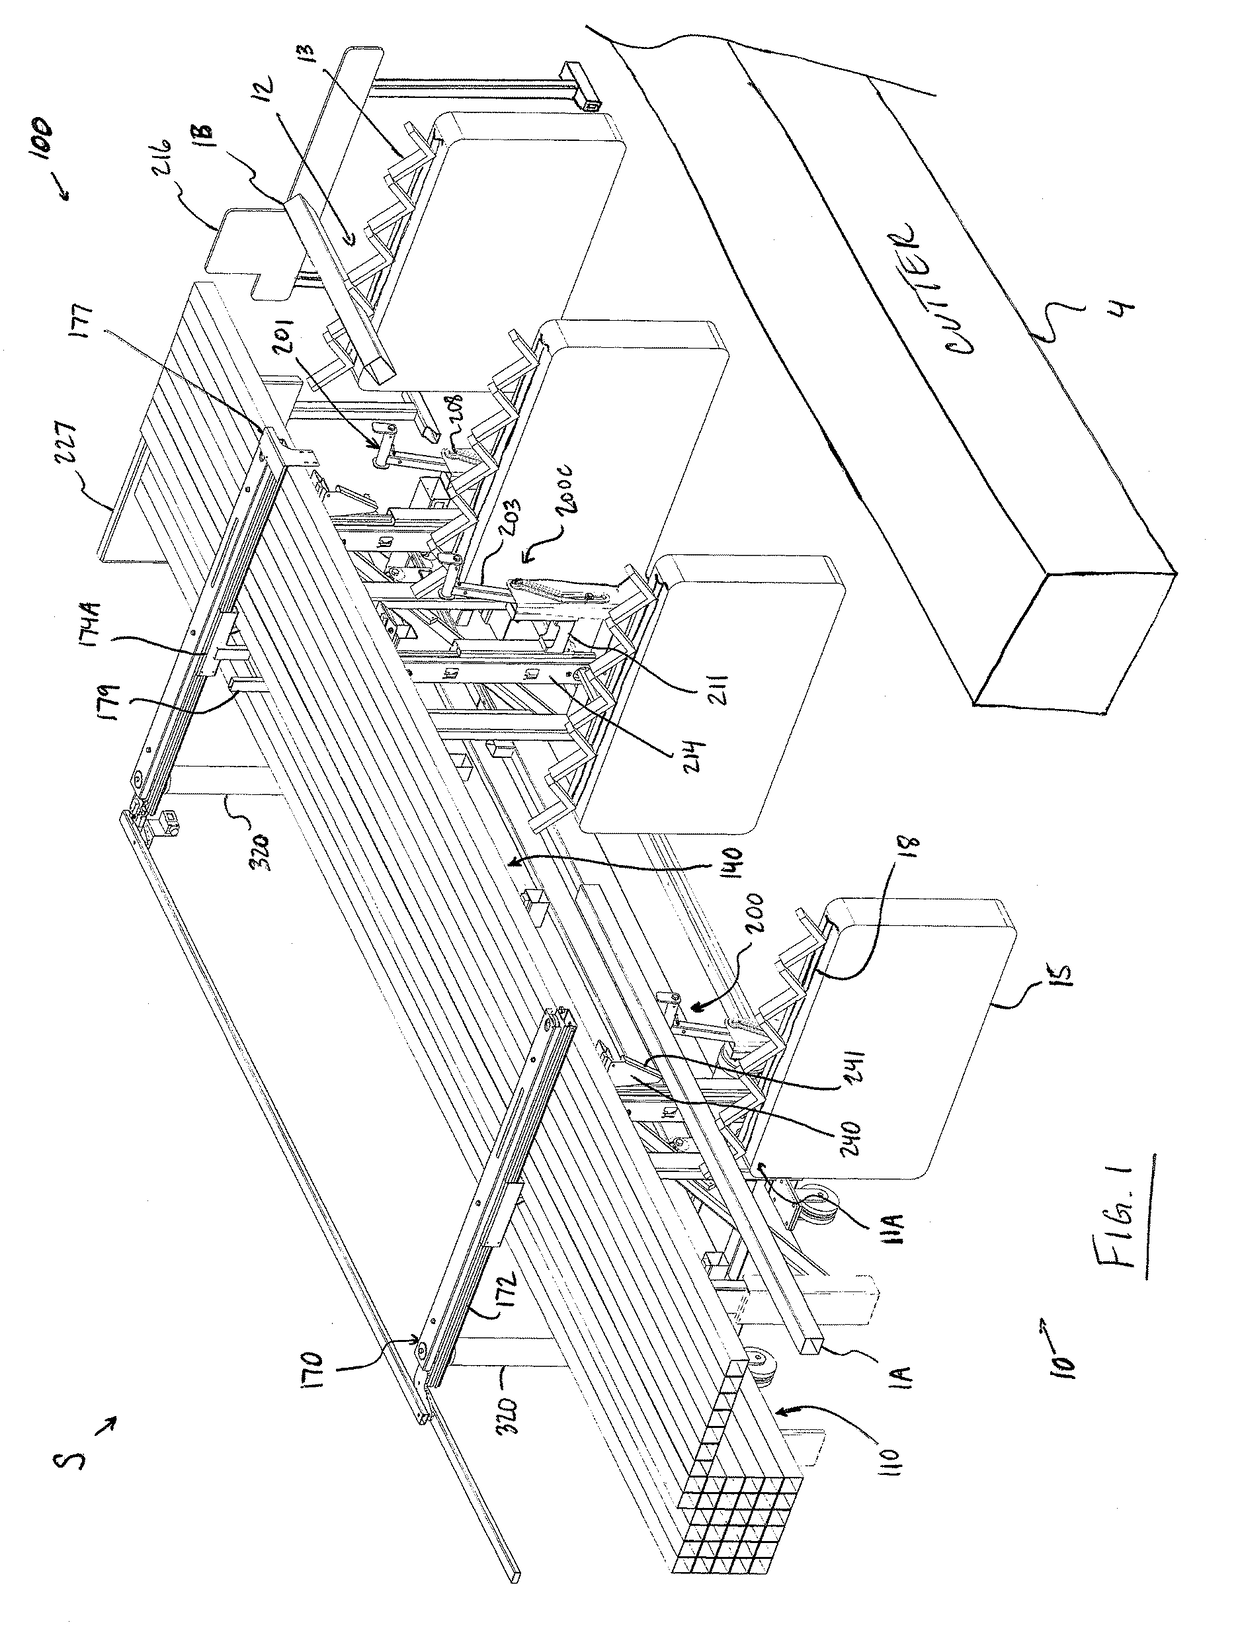 System for loading elongated members such as tubes onto a conveyor for later processing